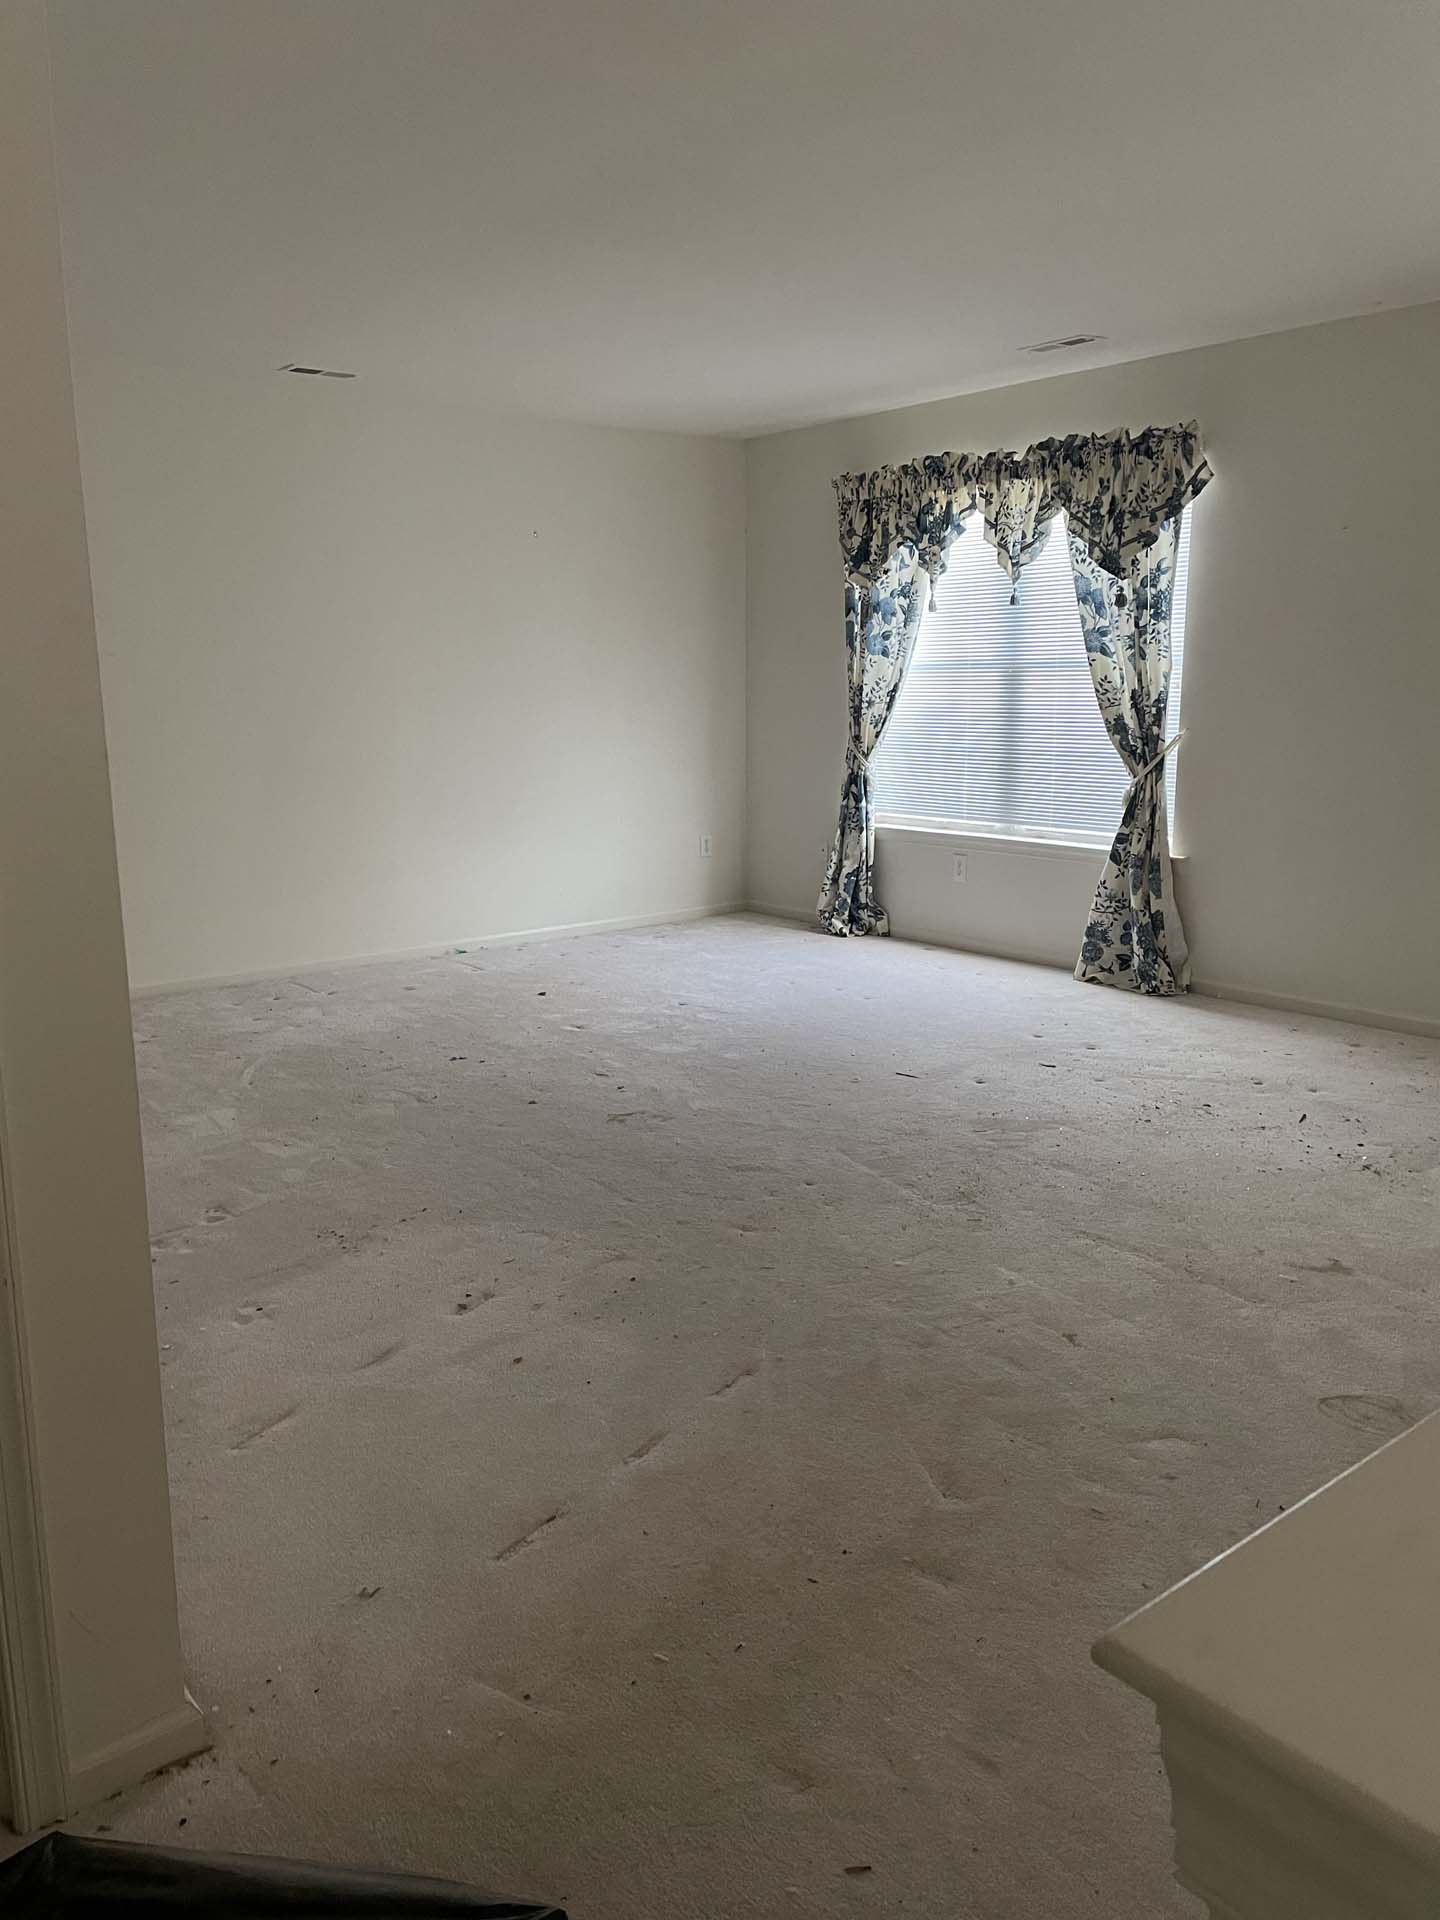 Bedroom with old carpet